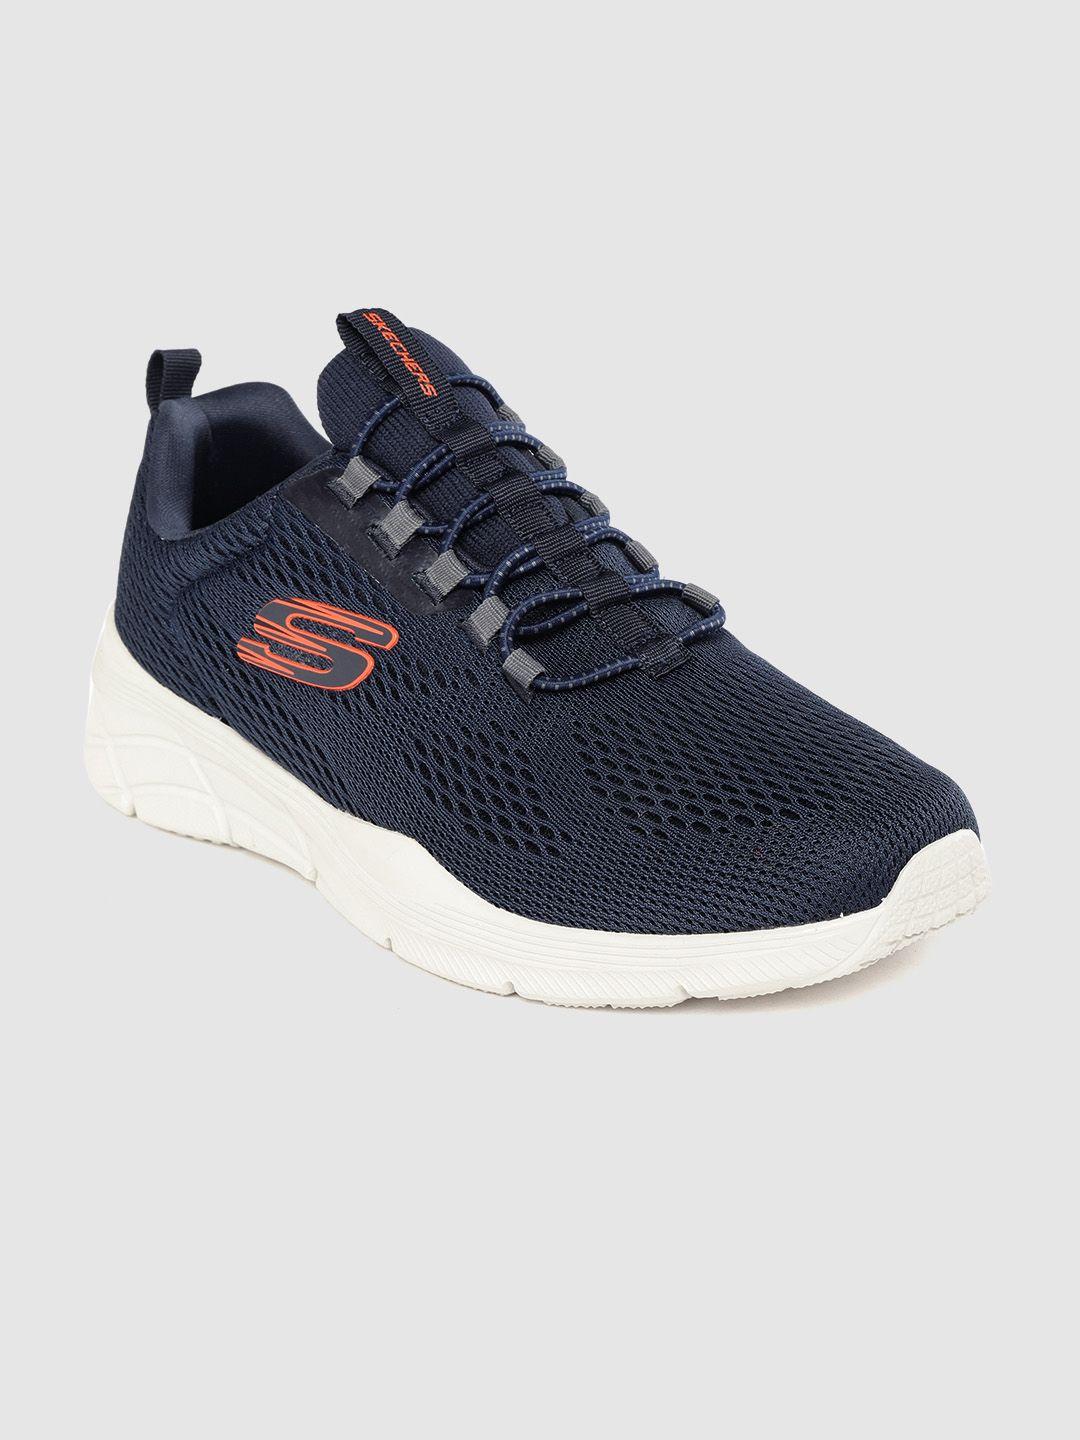 skechers men navy blue woven design equalizer 4.0 - wraithern sneakers